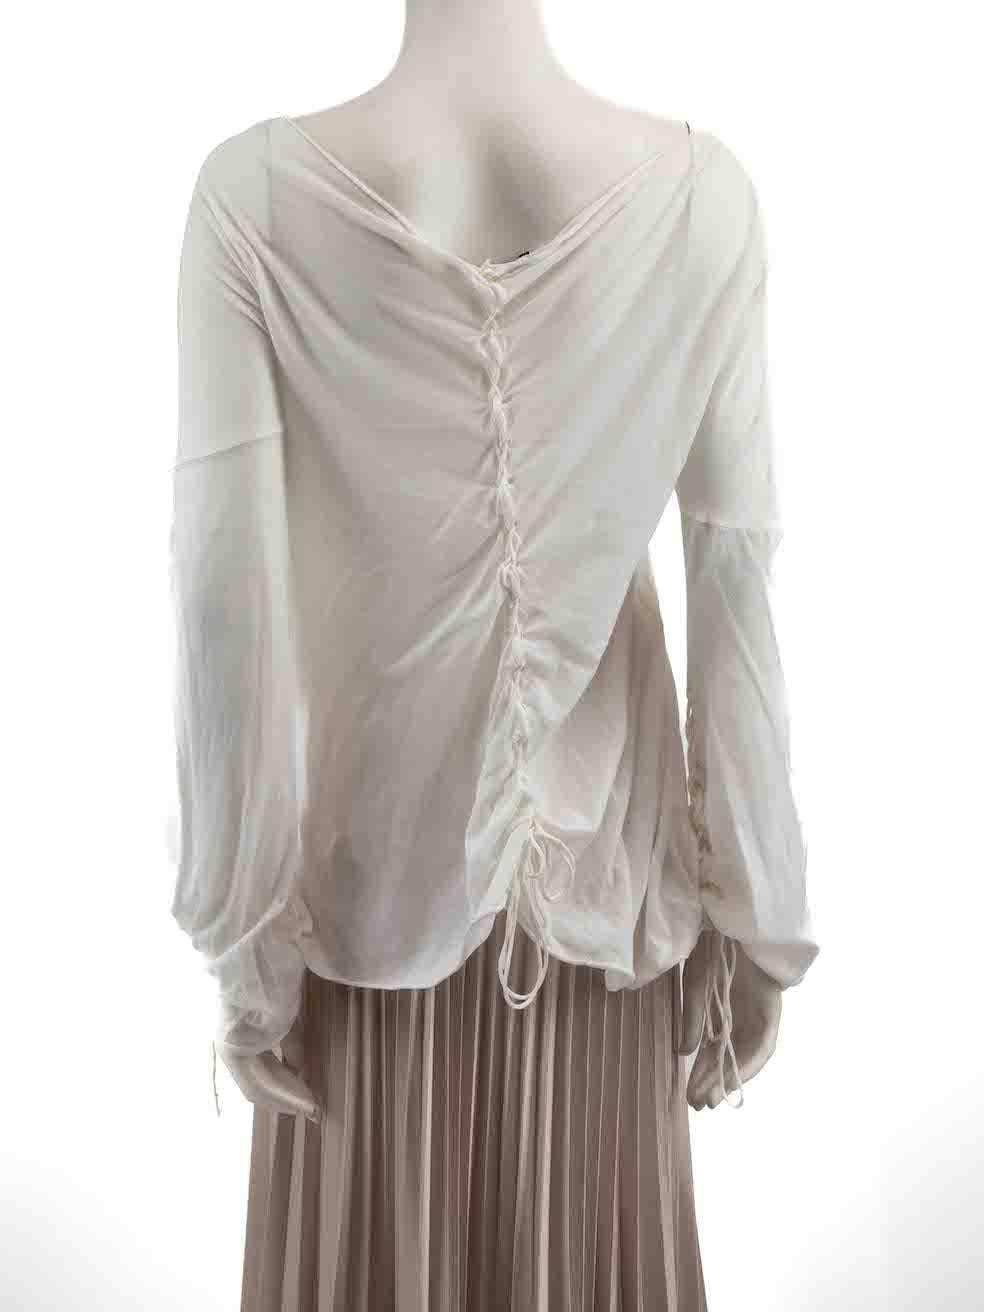 Gucci Cream Lace Up Long Sleeve Top Size M In Good Condition For Sale In London, GB